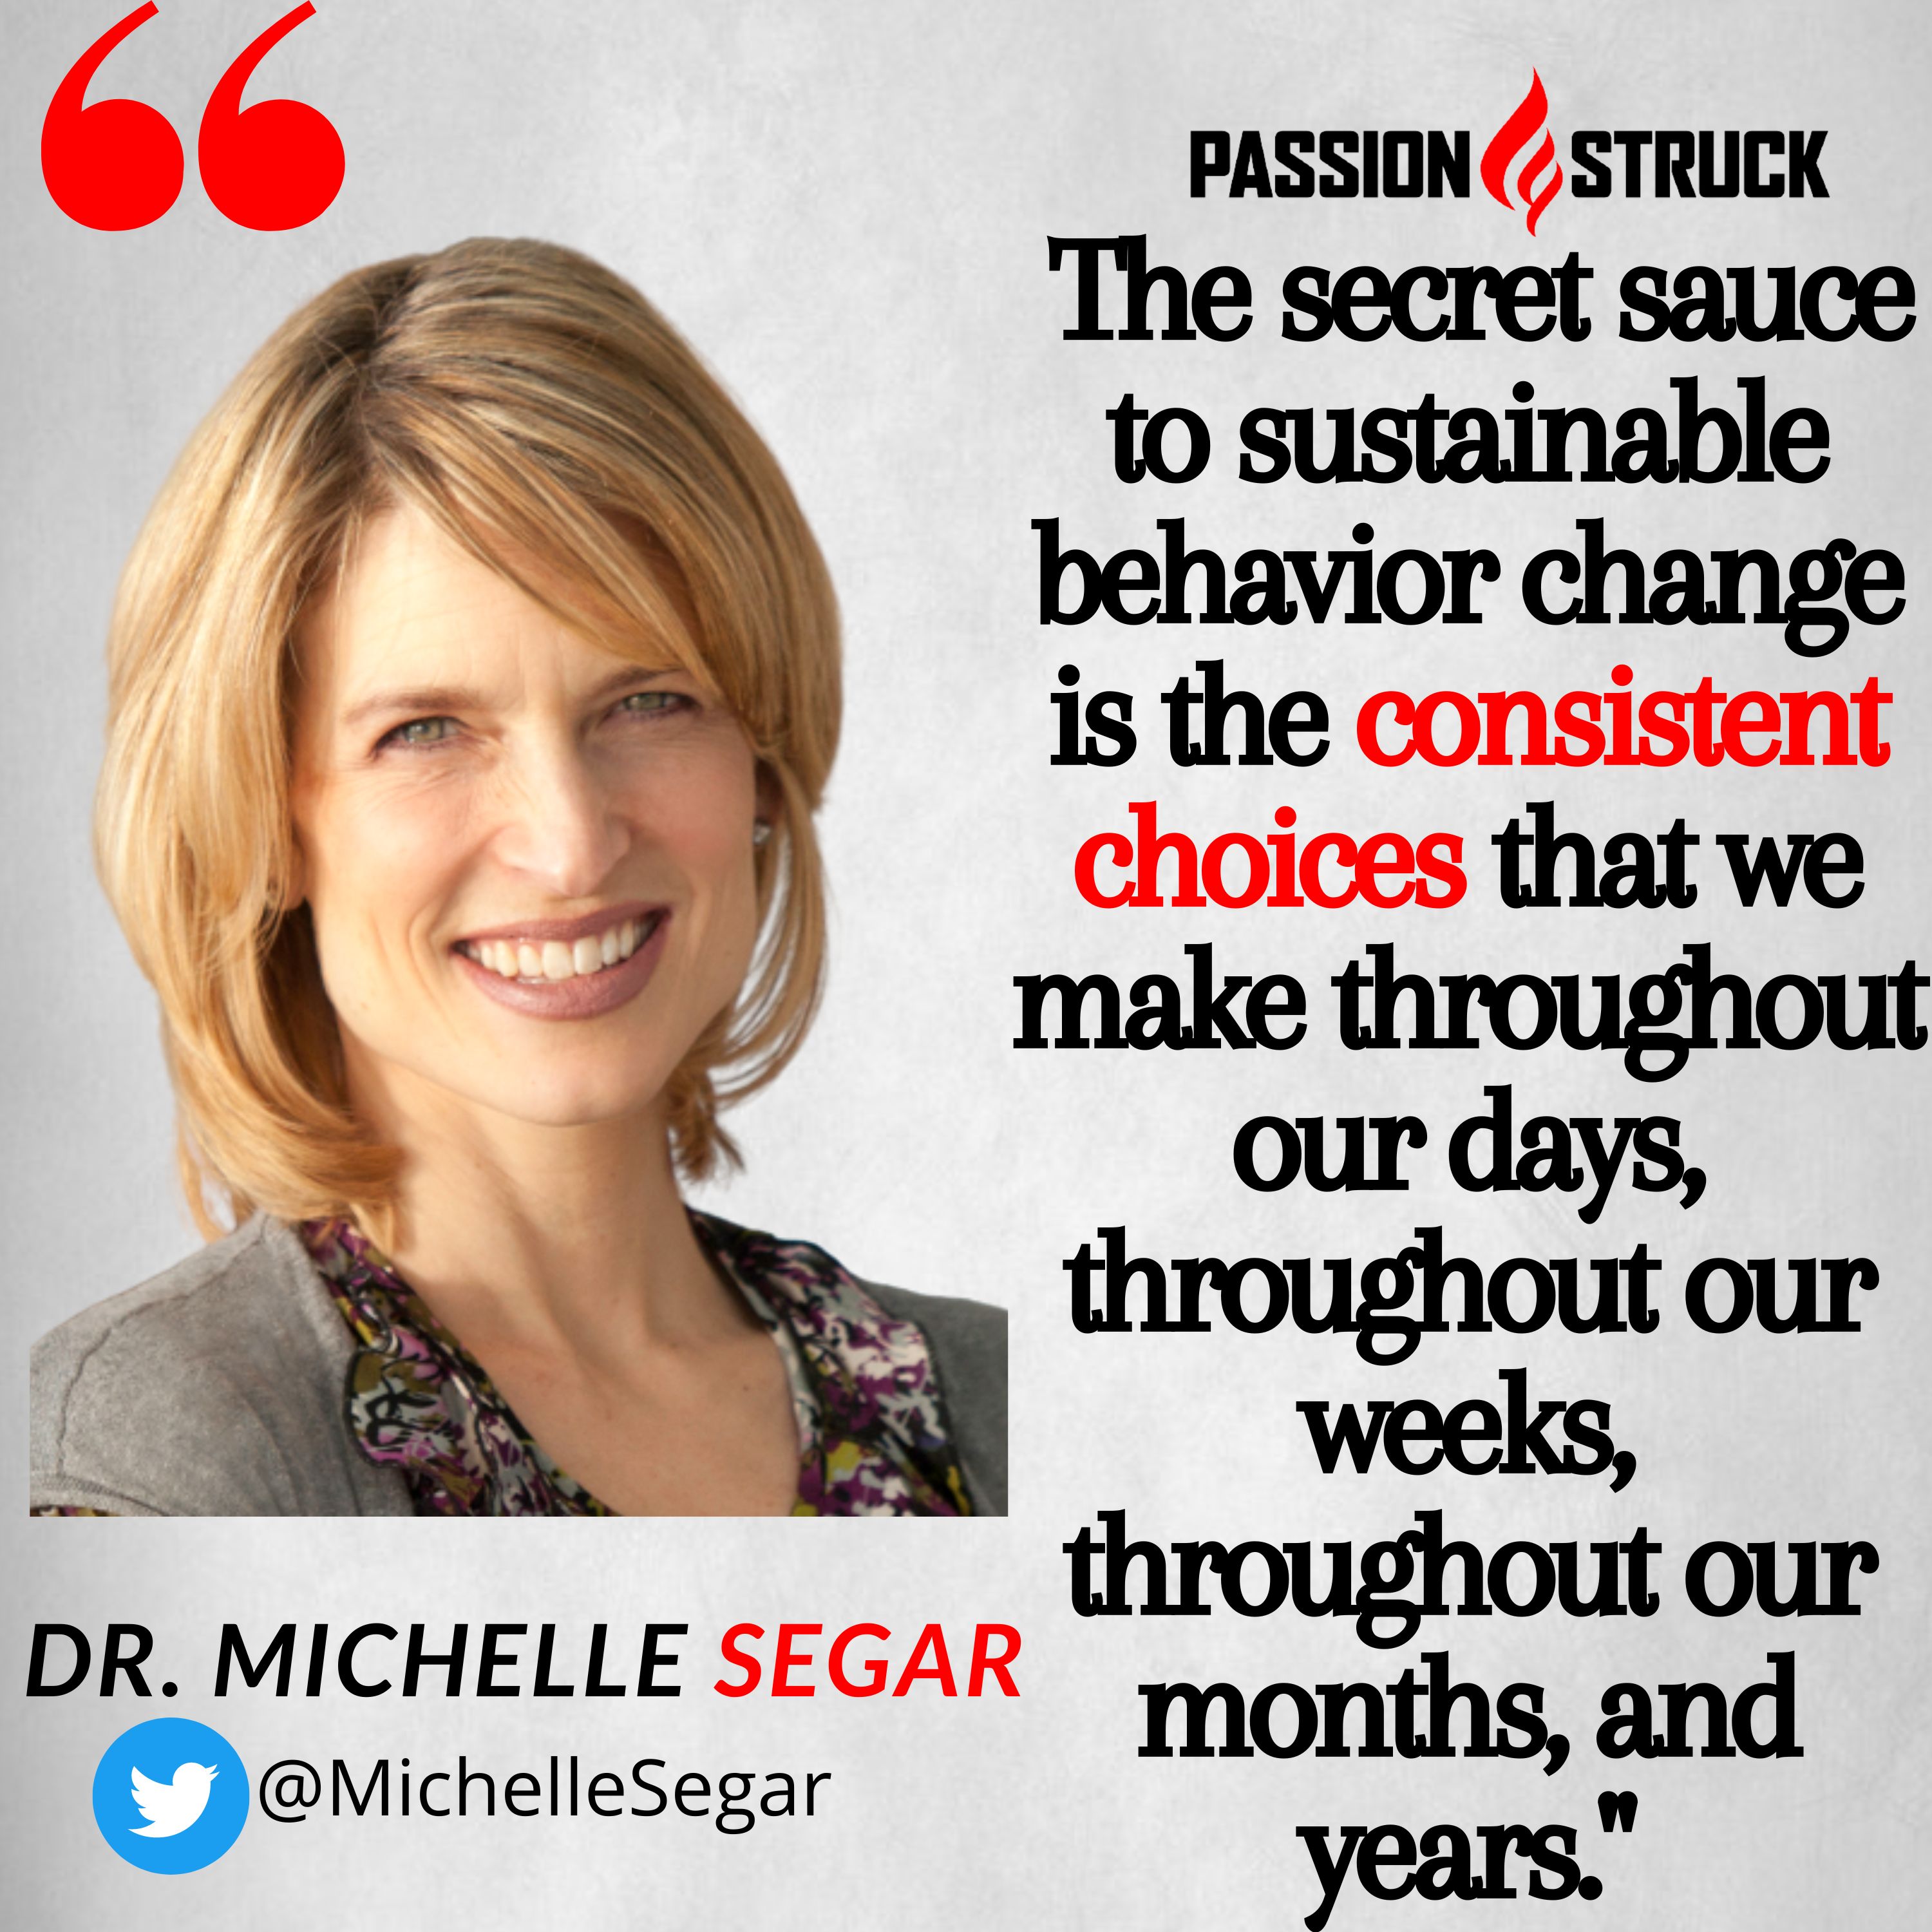 Quote by Michelle Segar about the Joy Choice and micro choices for passion struck.